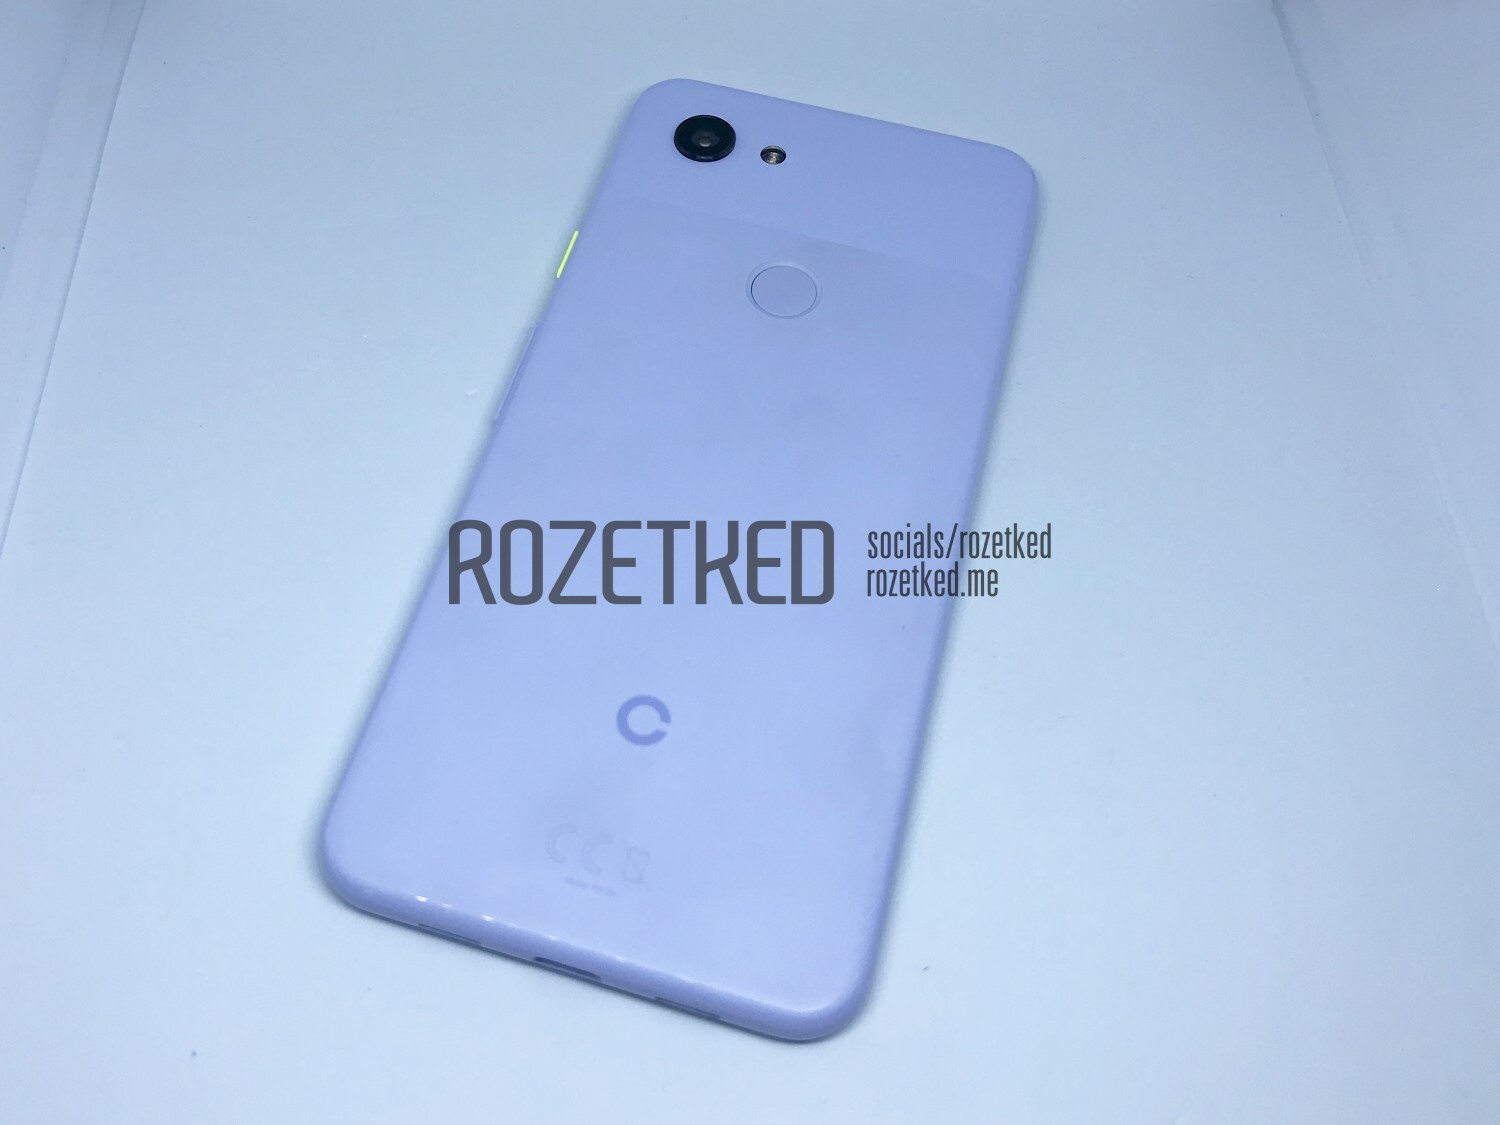 What will the Google Pixel 3a look like?